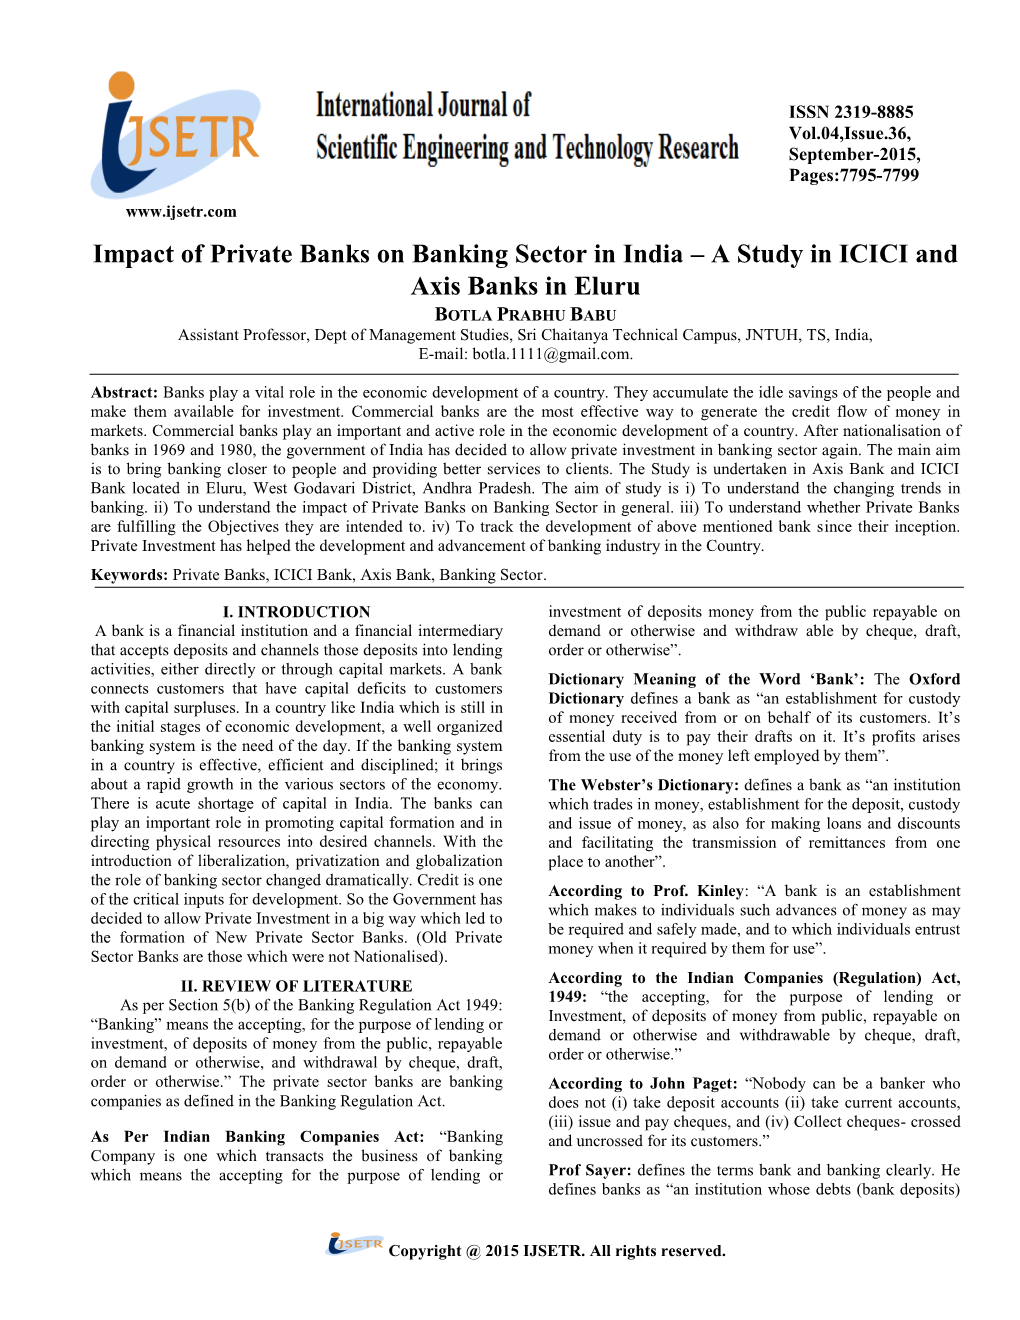 Impact of Private Banks on Banking Sector in India – a Study in ICICI and Axis Banks in Eluru